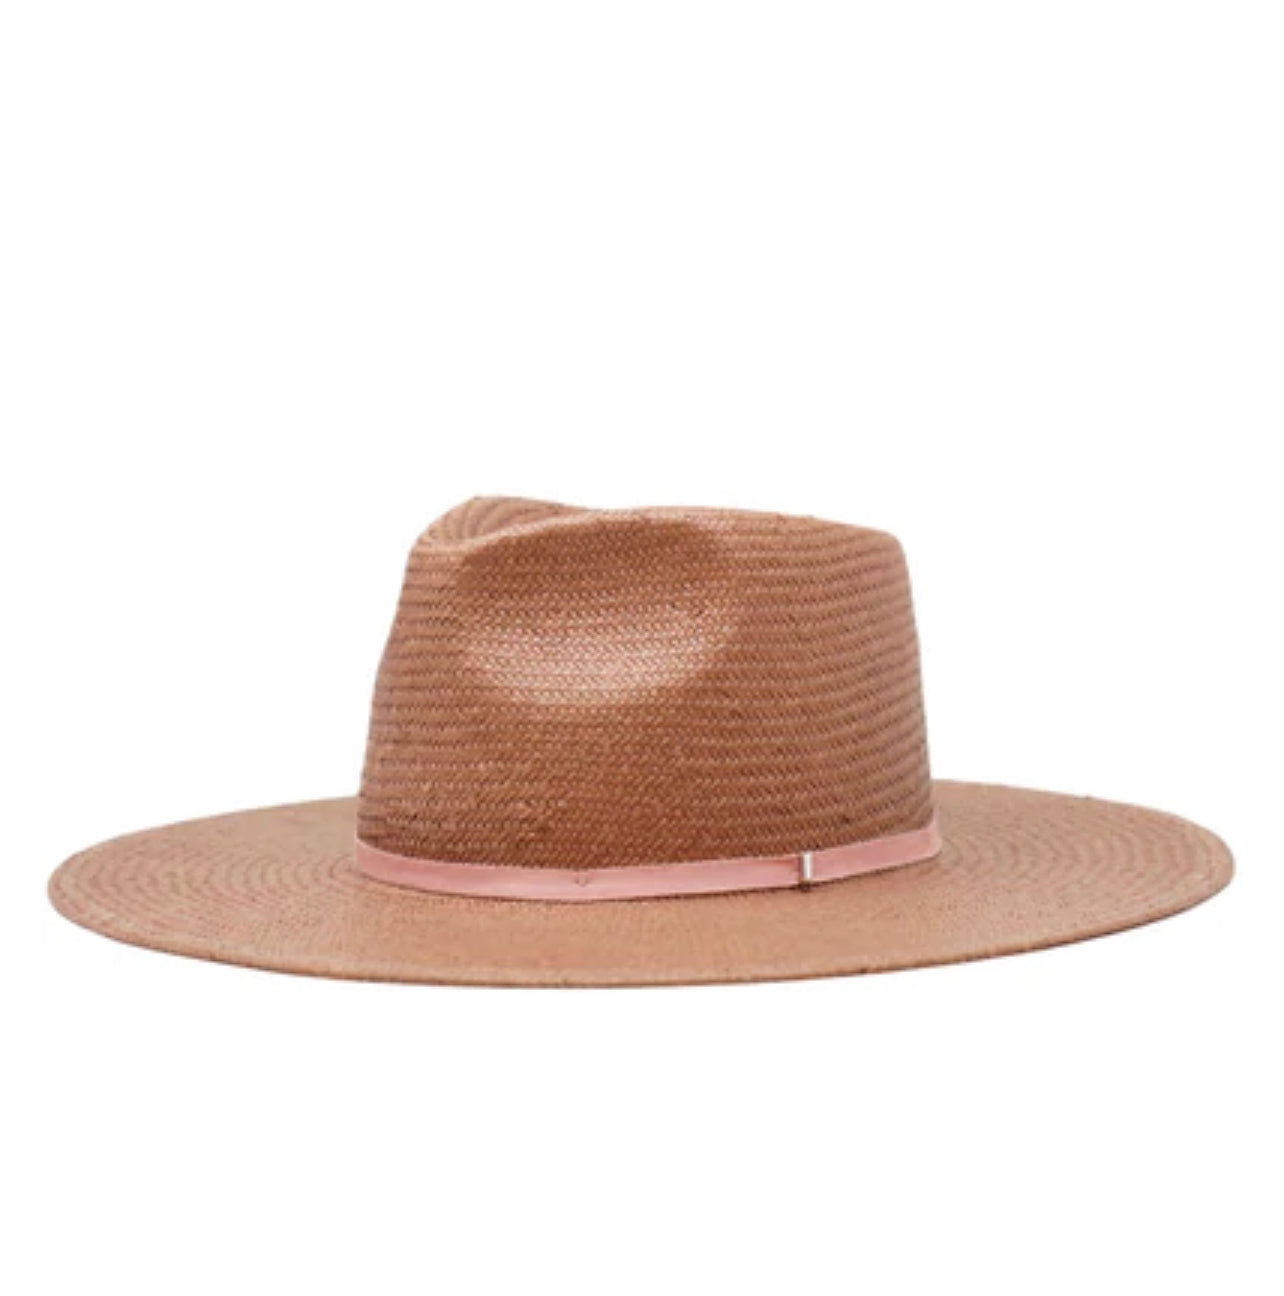 rose pink straw rancher hat